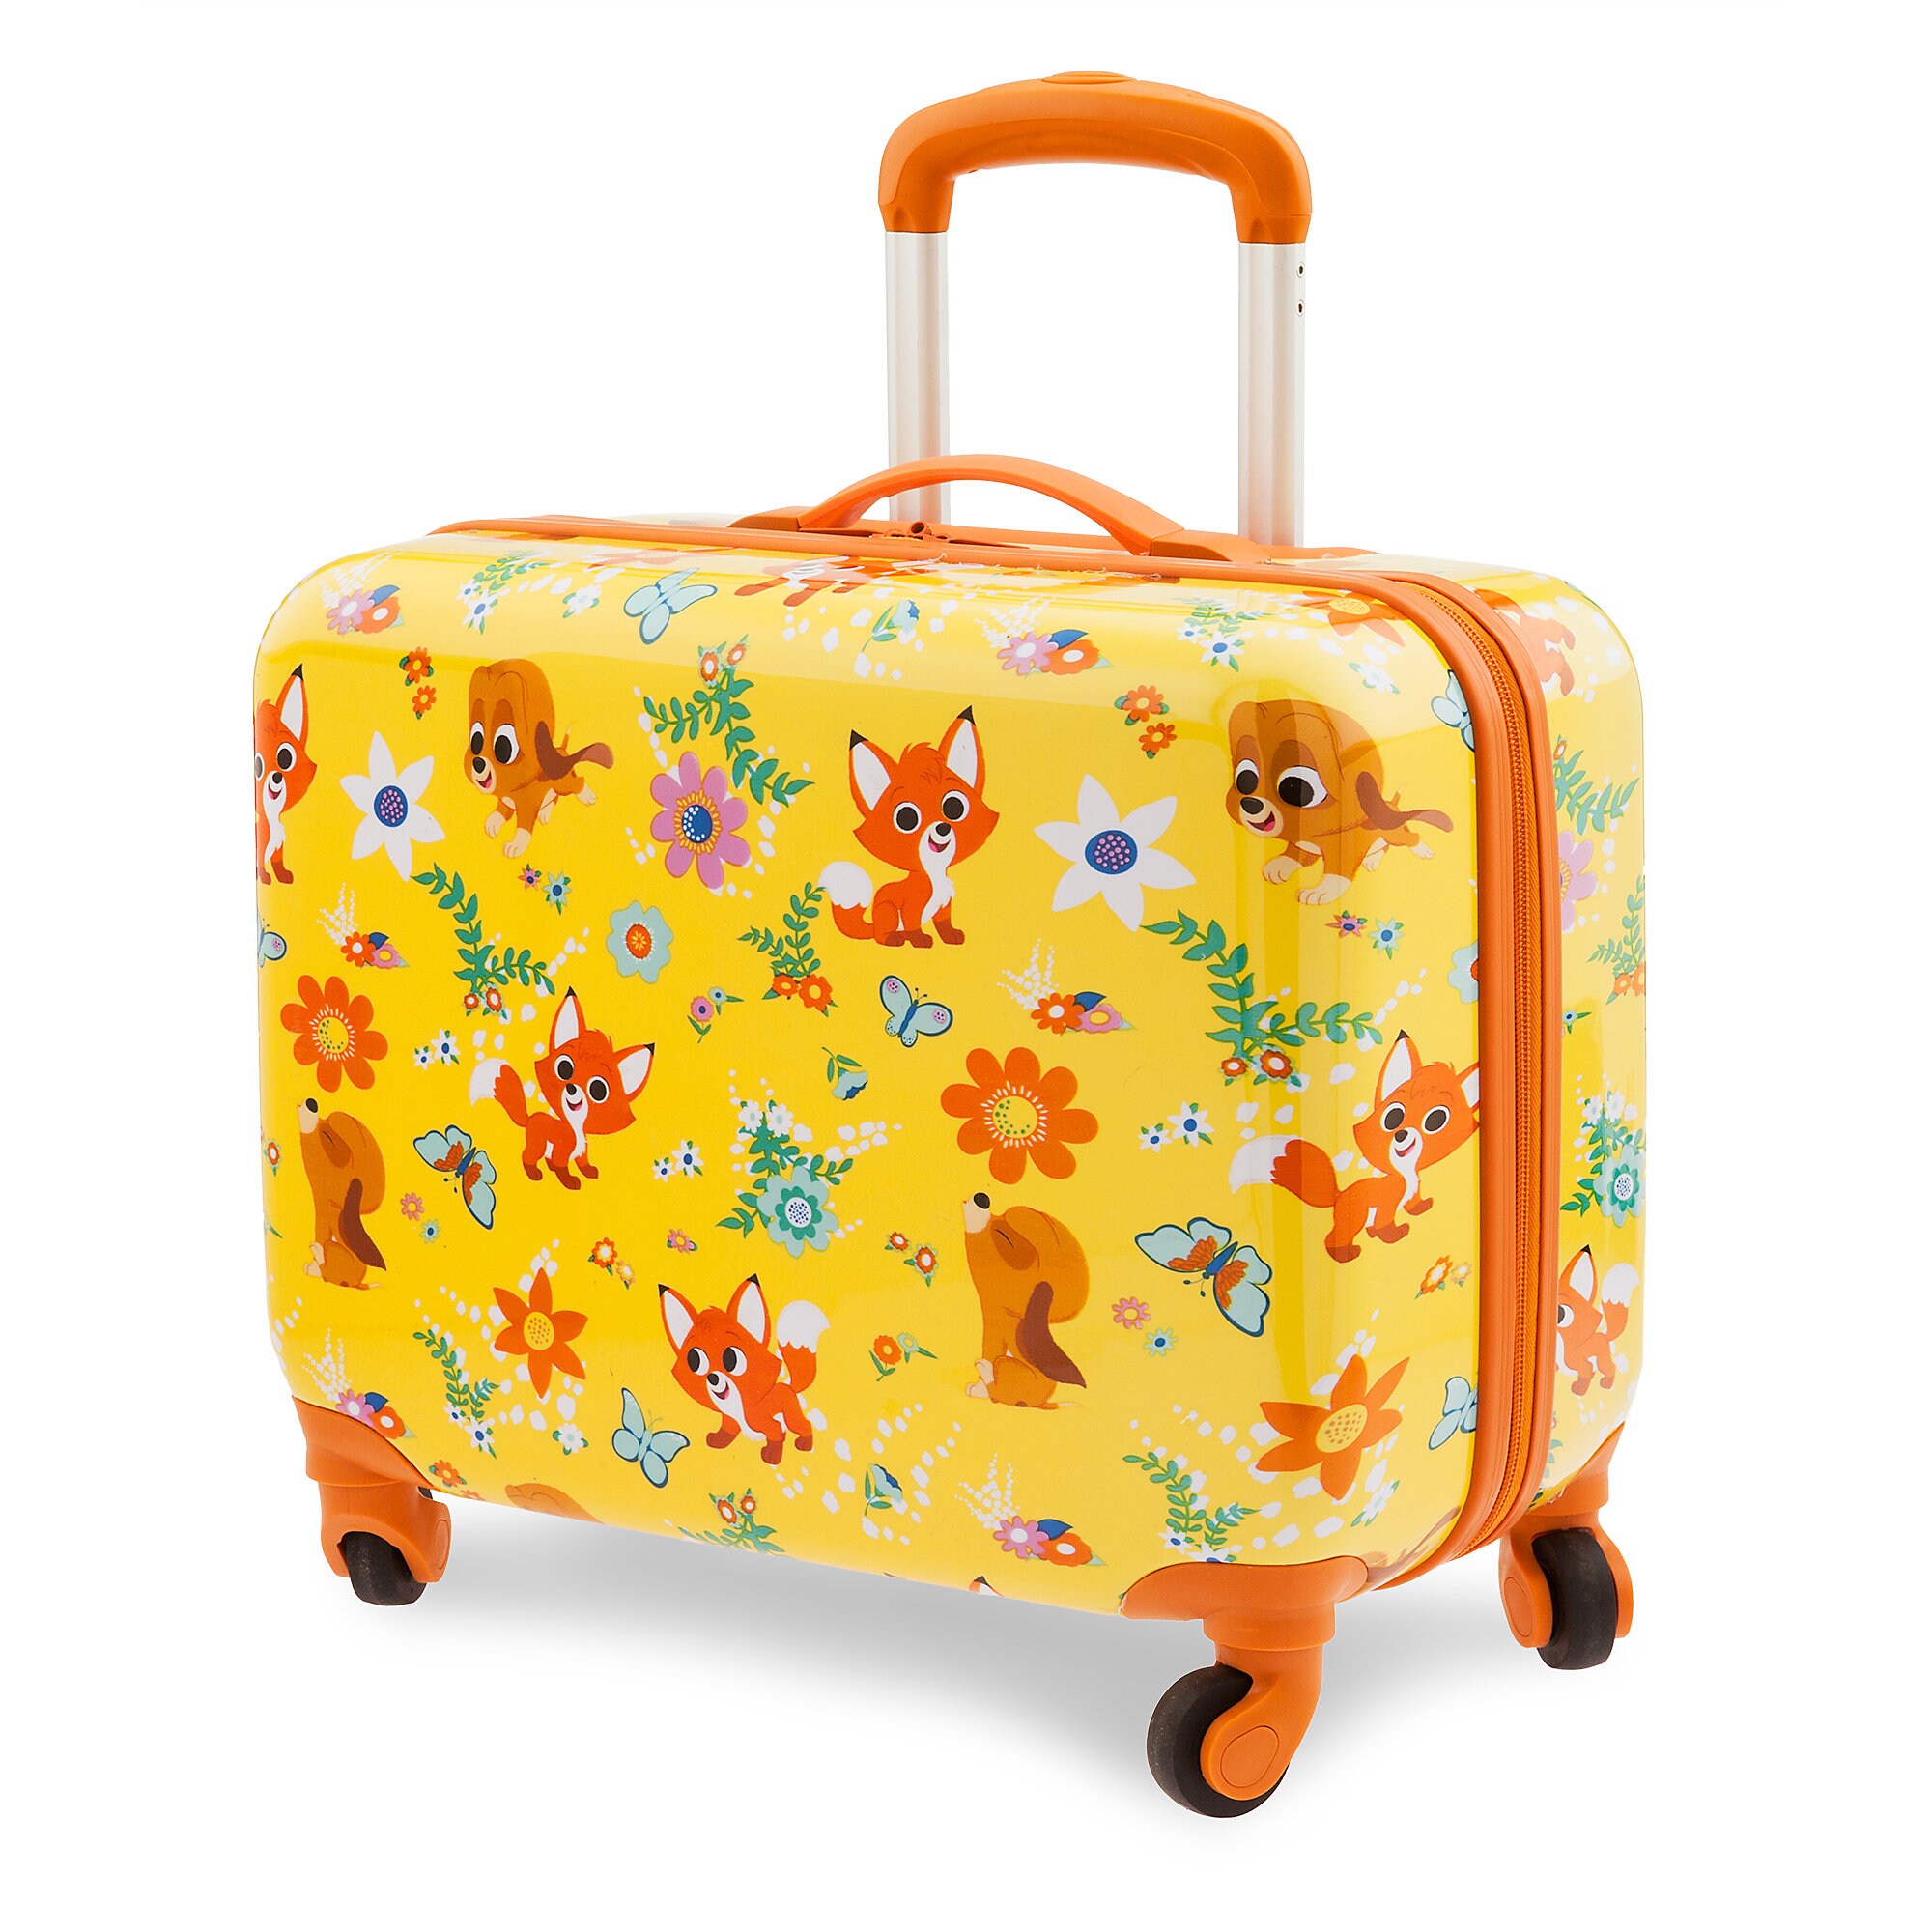 The Fox and the Hound Rolling Luggage - Disney's Furrytale Friends